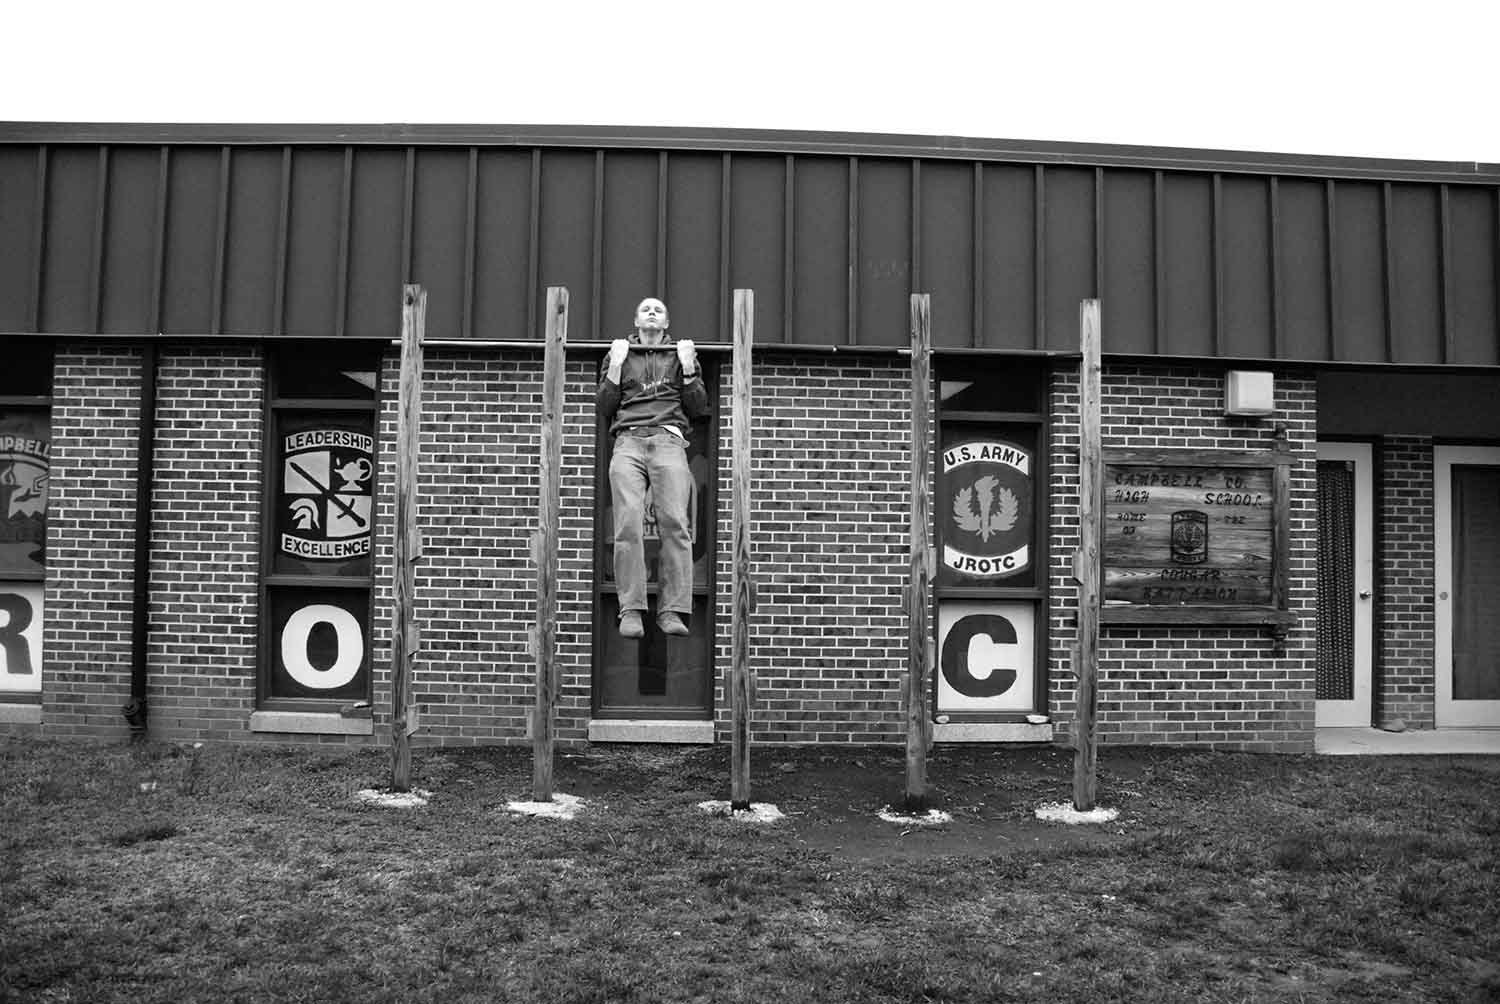 Cameron McDonald demonstrates the use of the ROTC pull-up bars in front of the ROTC room. He does about ten without breaking a sweat. photo by James Bolton - 2009